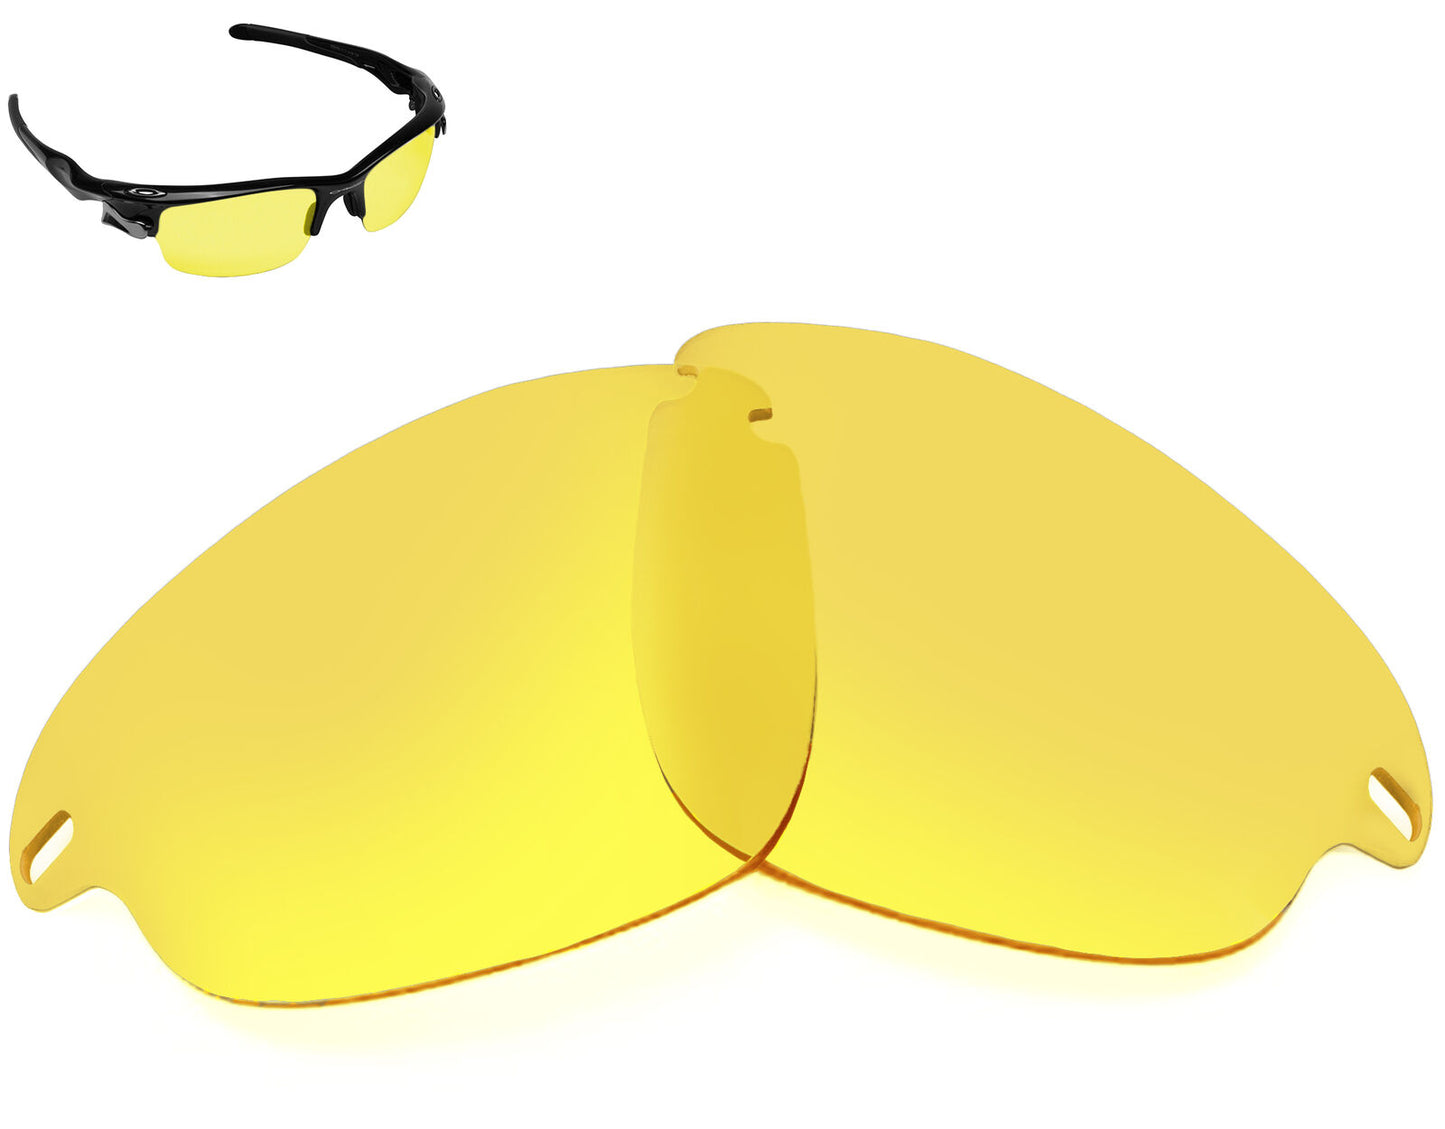 LenSwitch Polarized Replacement Lenses for Oakley Fast Jacket Sunglasses Yellow